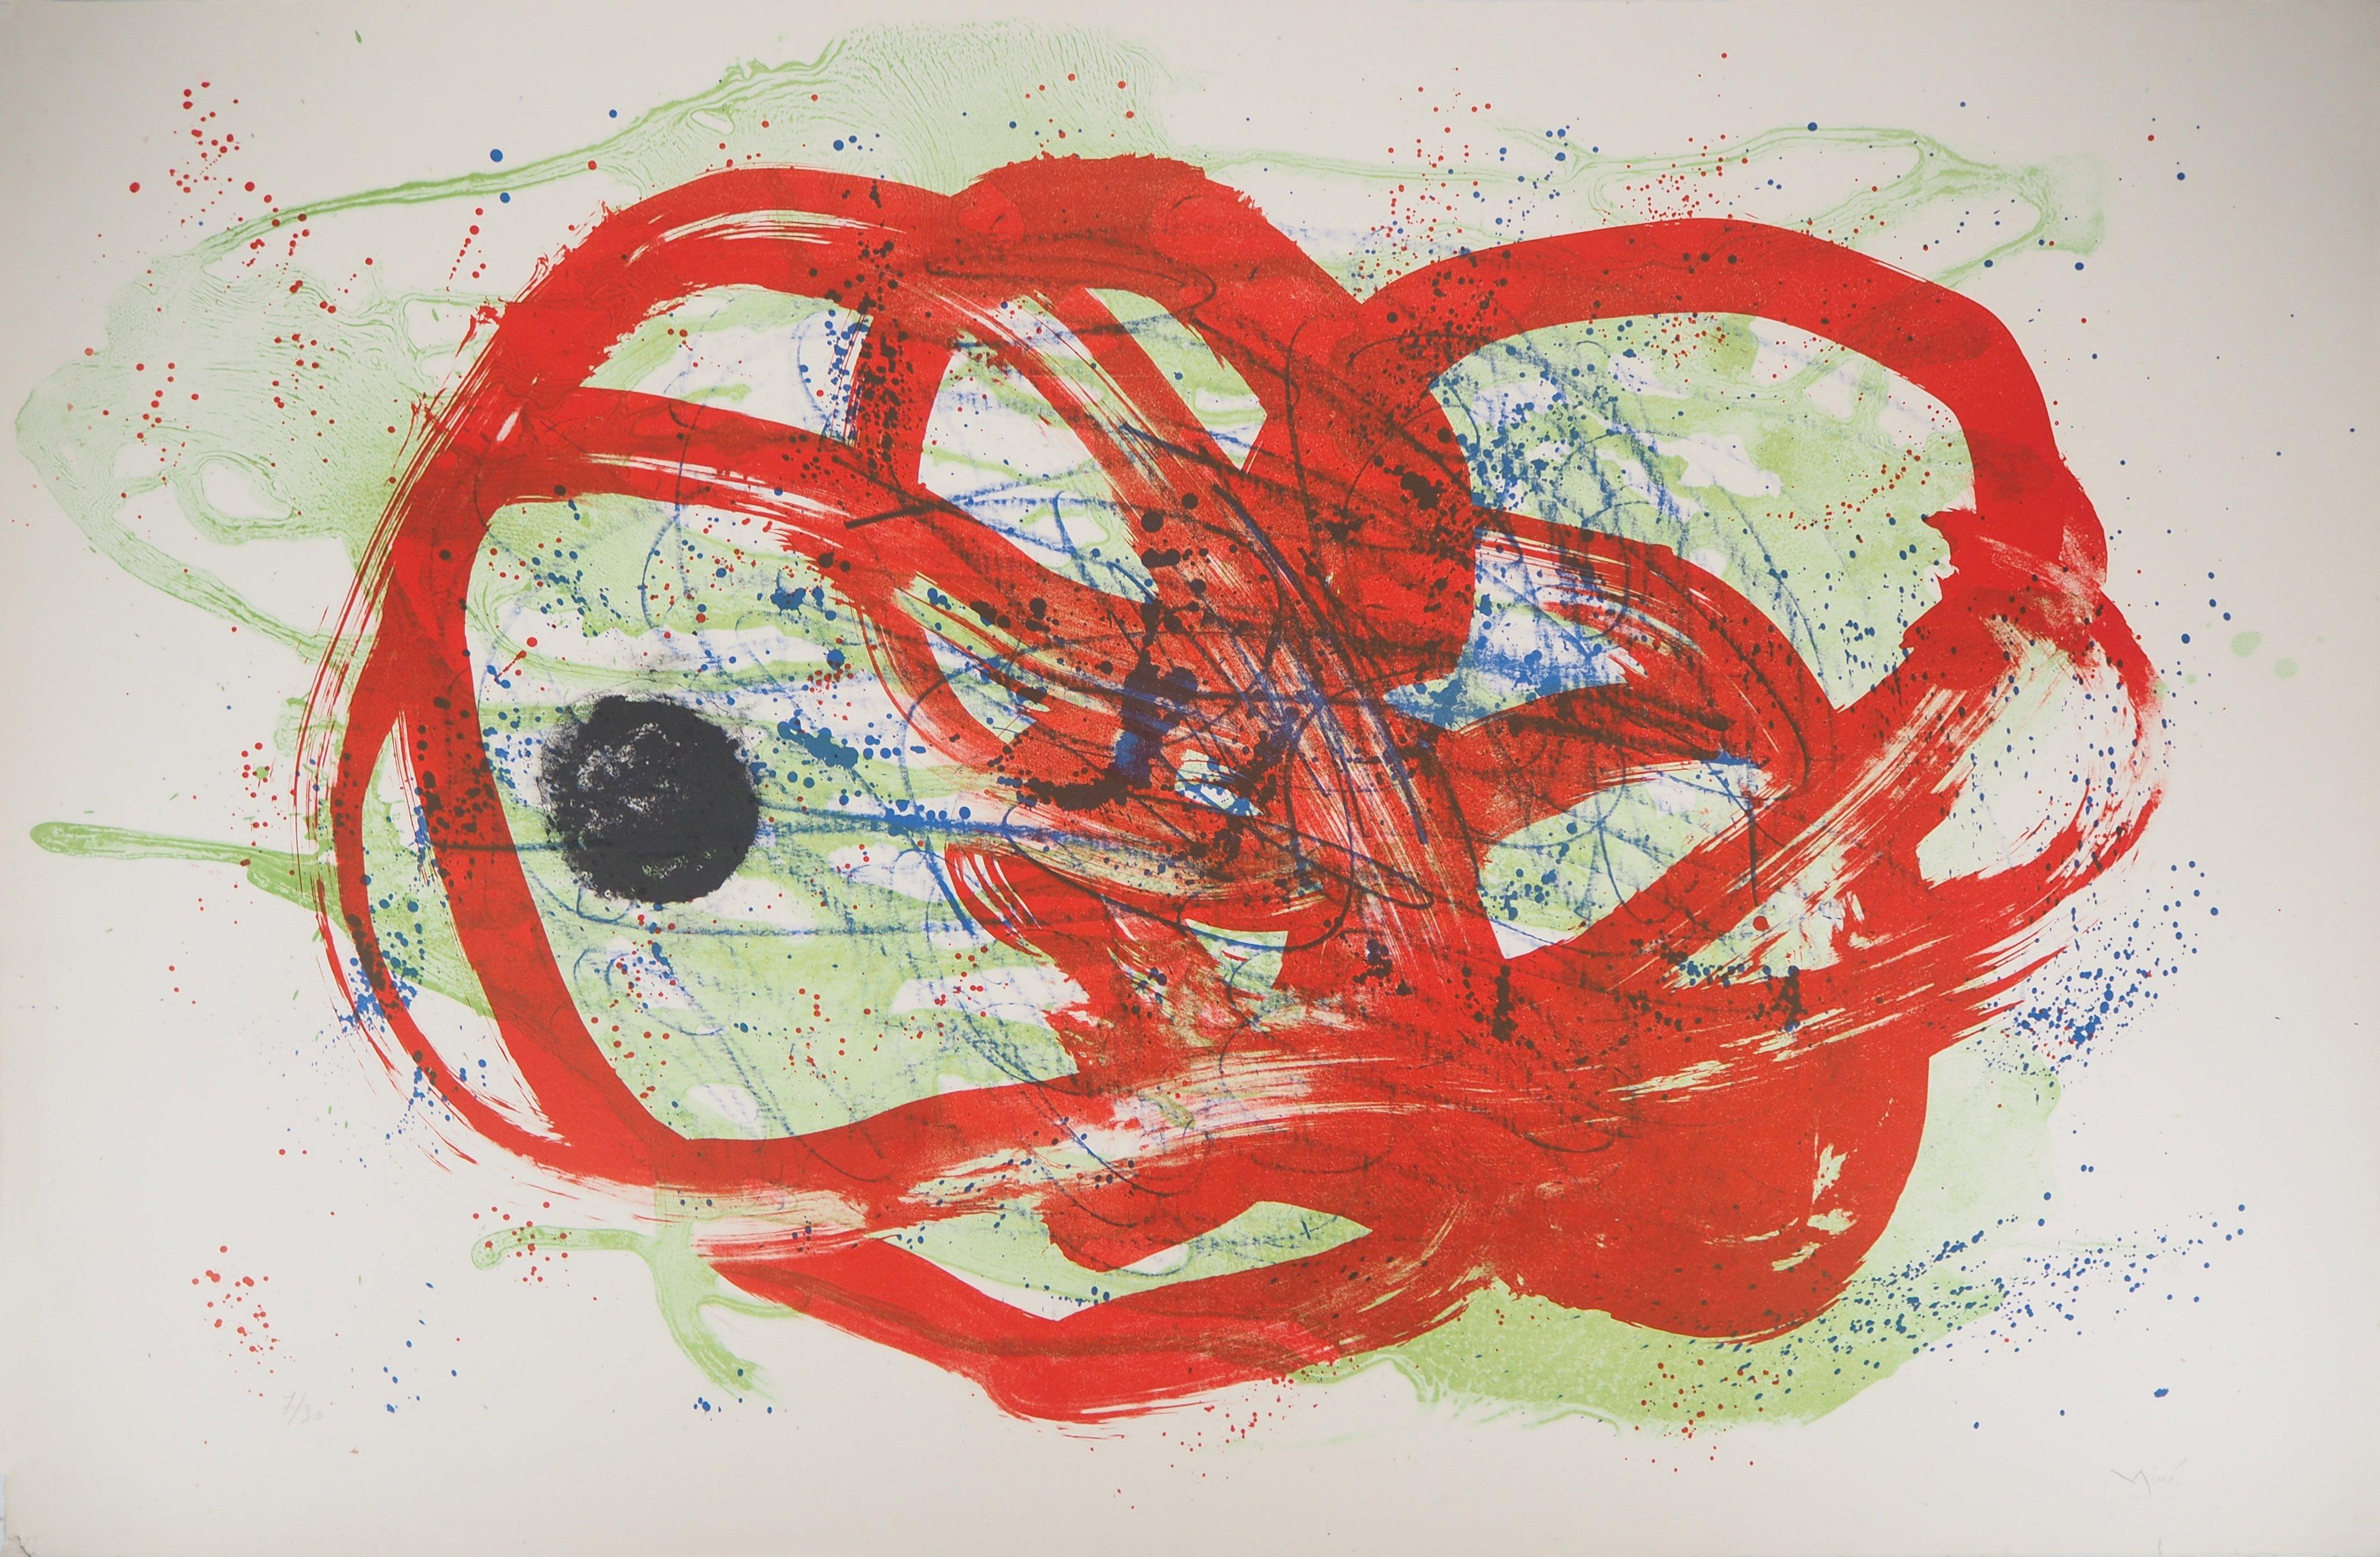 Joan Miró Abstract Print - Green on Red, from Series I - Original Lithograph, Handsigned (Mourlot #283)